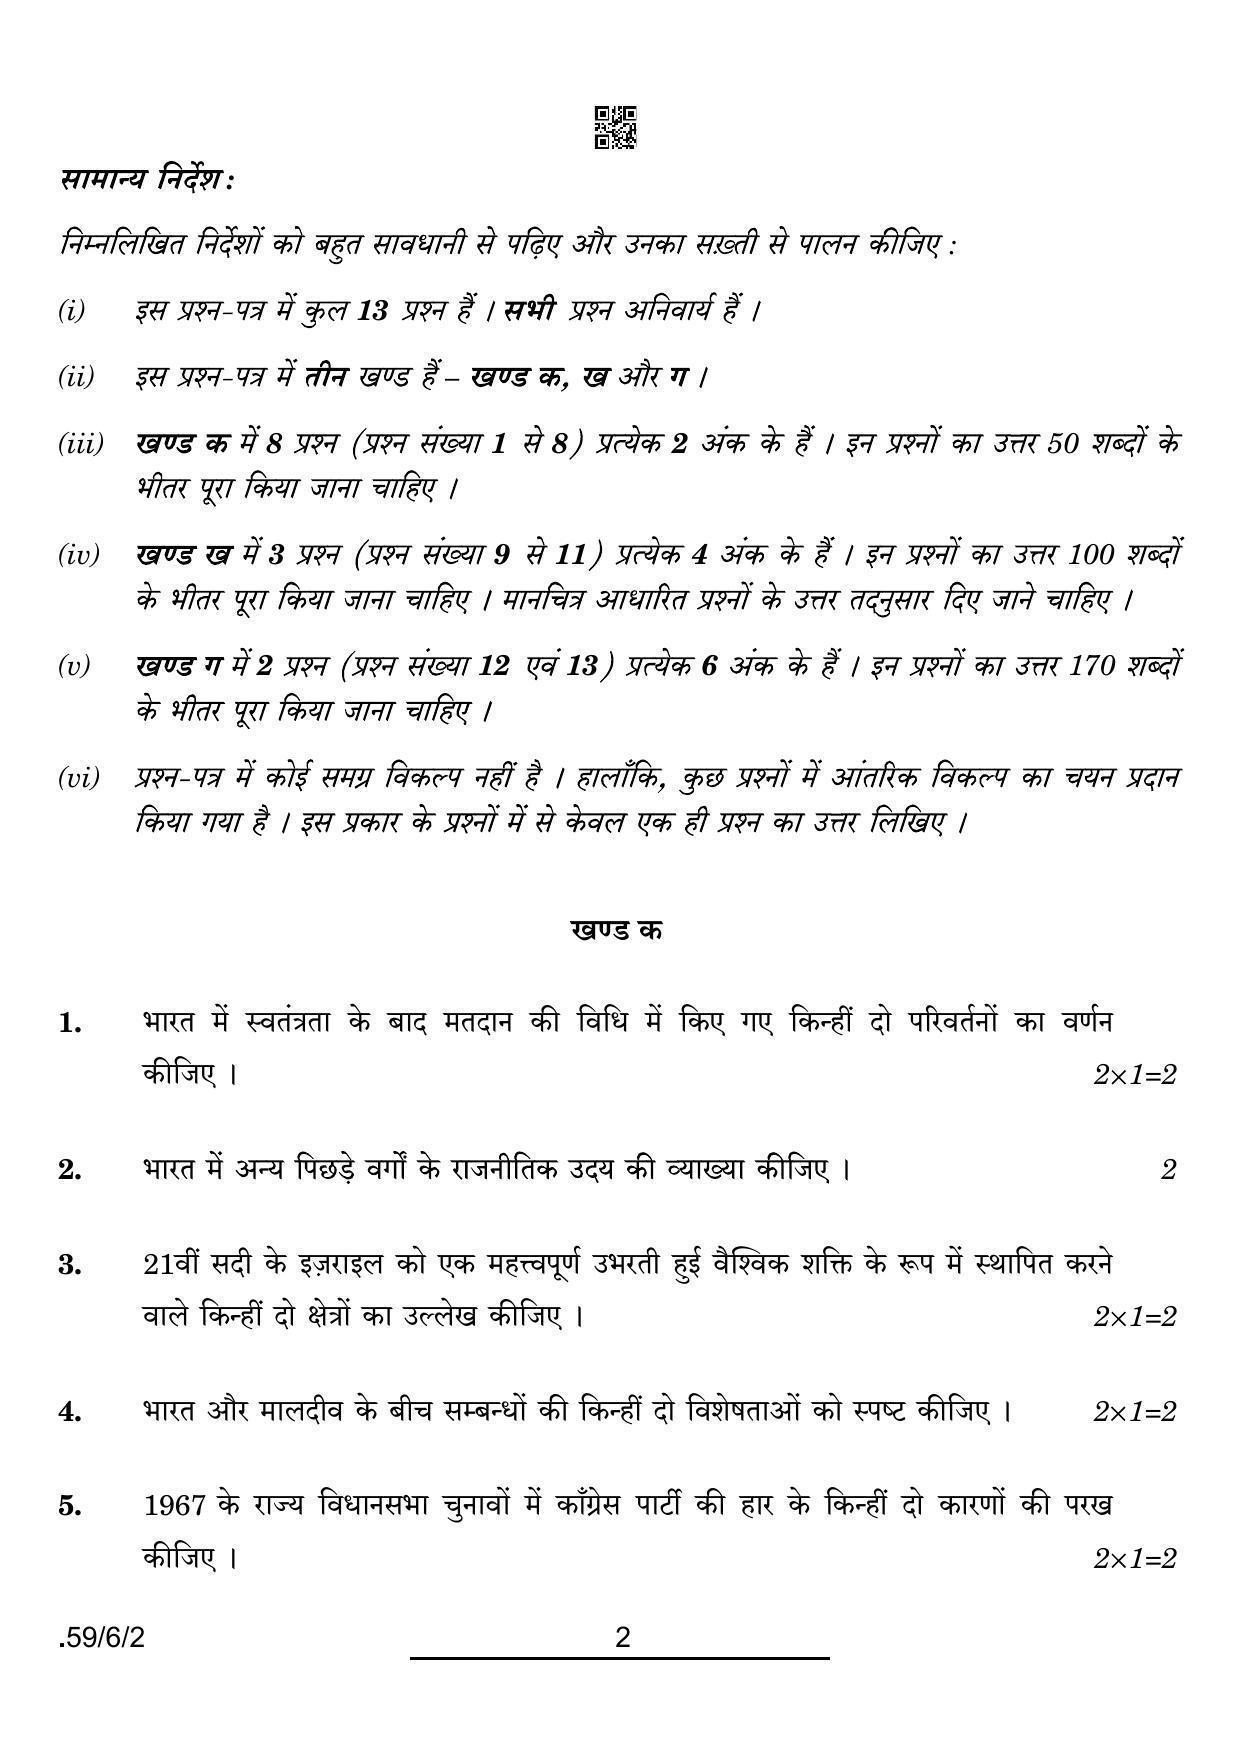 CBSE Class 12 59-6-2 POL SCIENCE 2022 Compartment Question Paper - Page 2